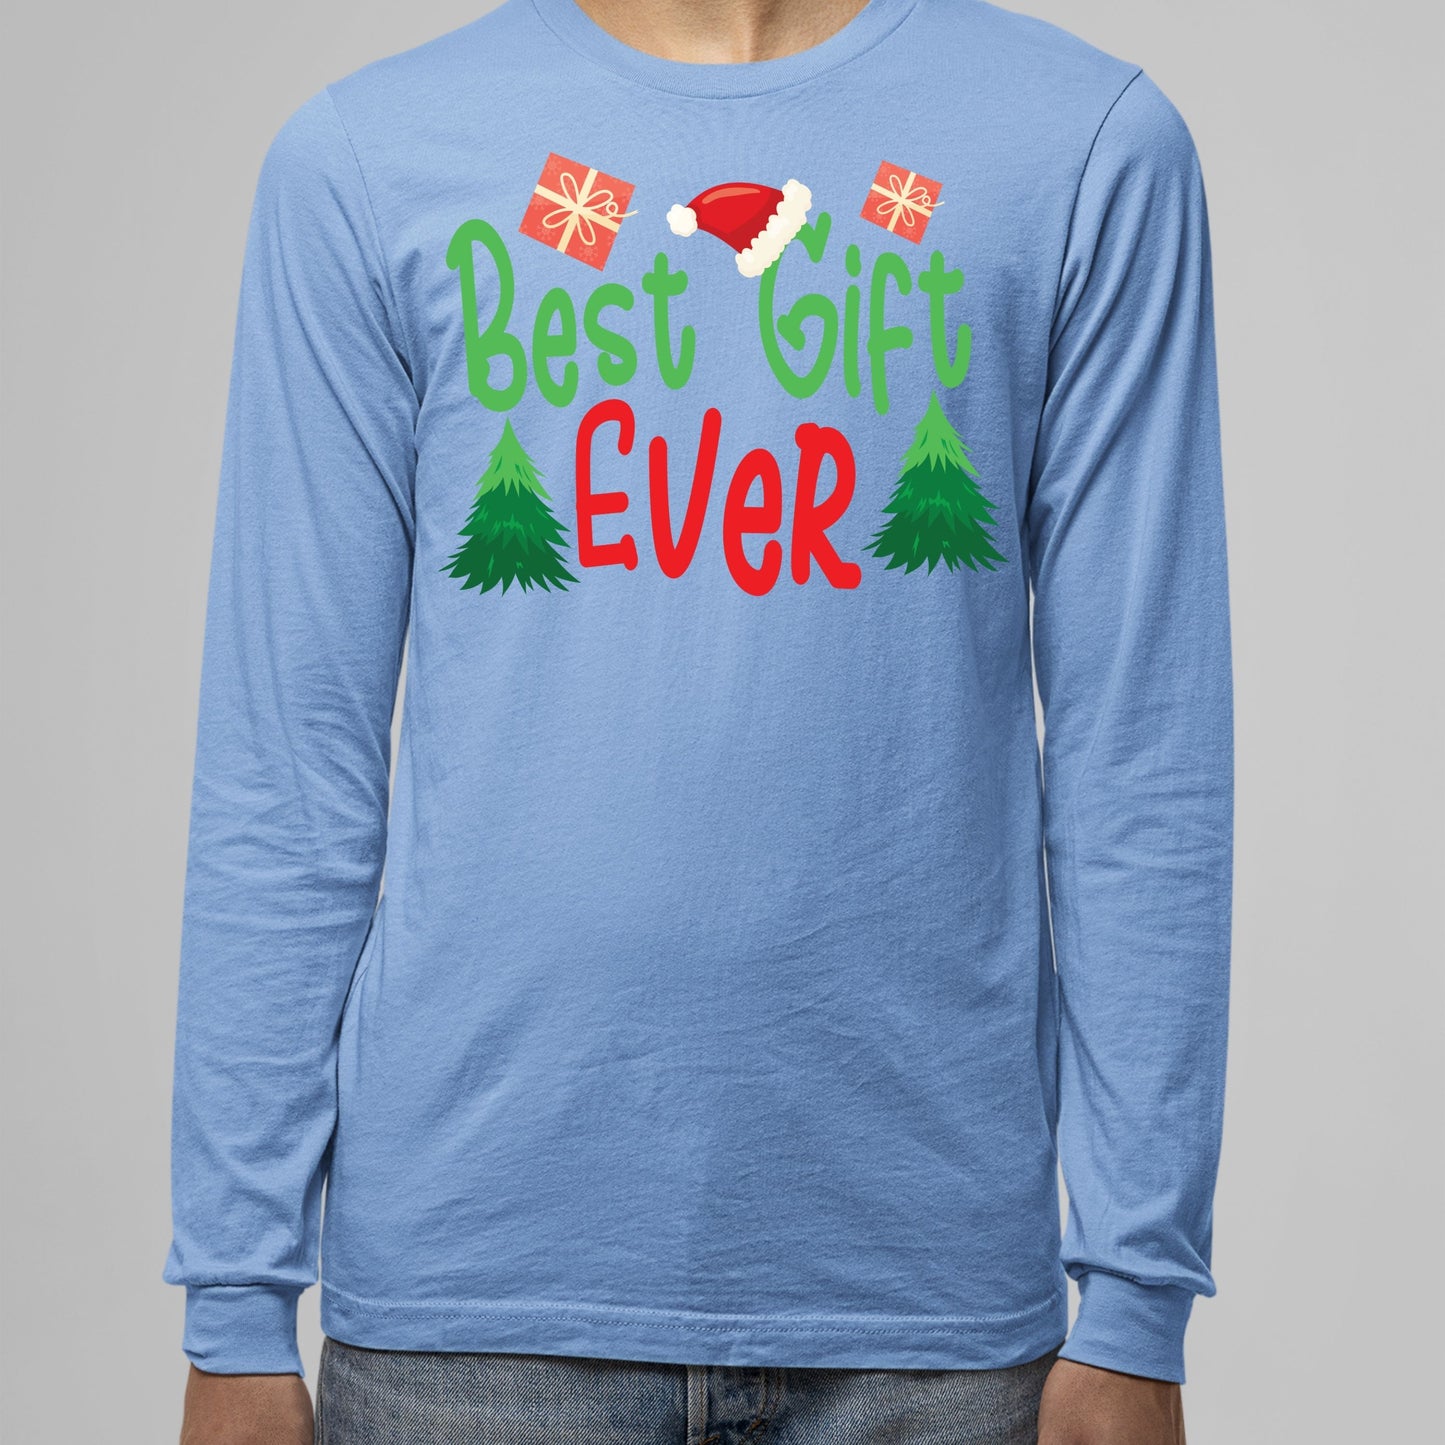 Best Gift Ever, Christmas Crewneck For Men, Christmas Long Sleeves, Christmas Sweatshirt, Christmas Sweater, Christmas Present